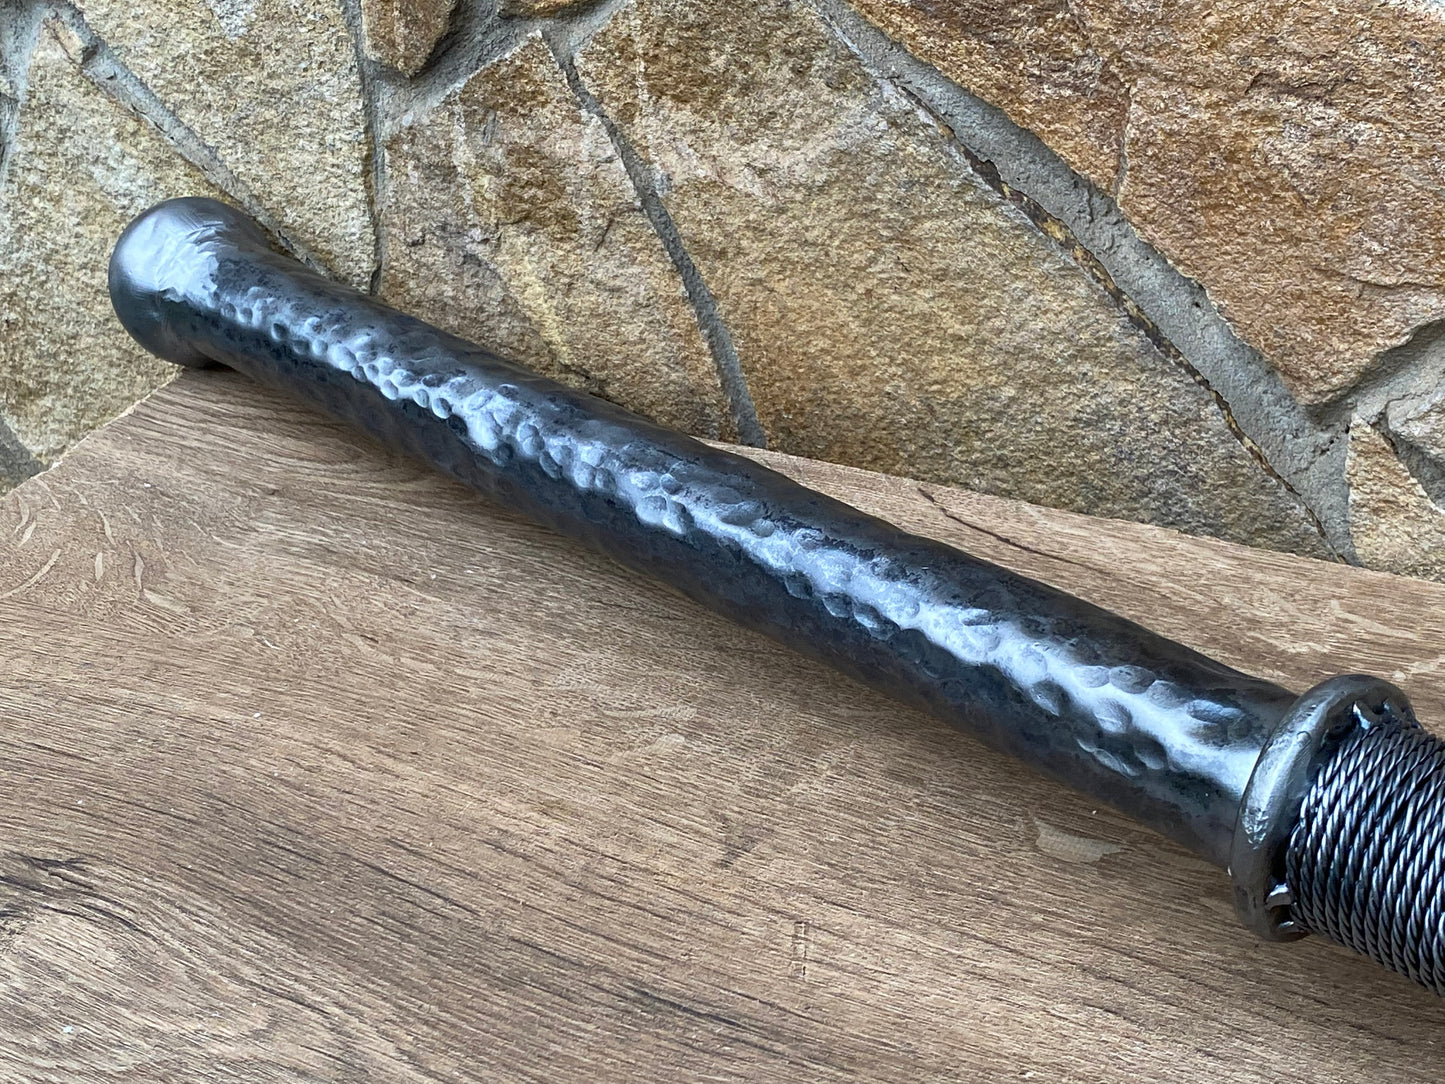 Decorative mace, viking mace, iron anniversary, cosplay, mace, sport, fitness, gym, flail, warrior, cosplay weapon, mens gifts,iron gift,axe